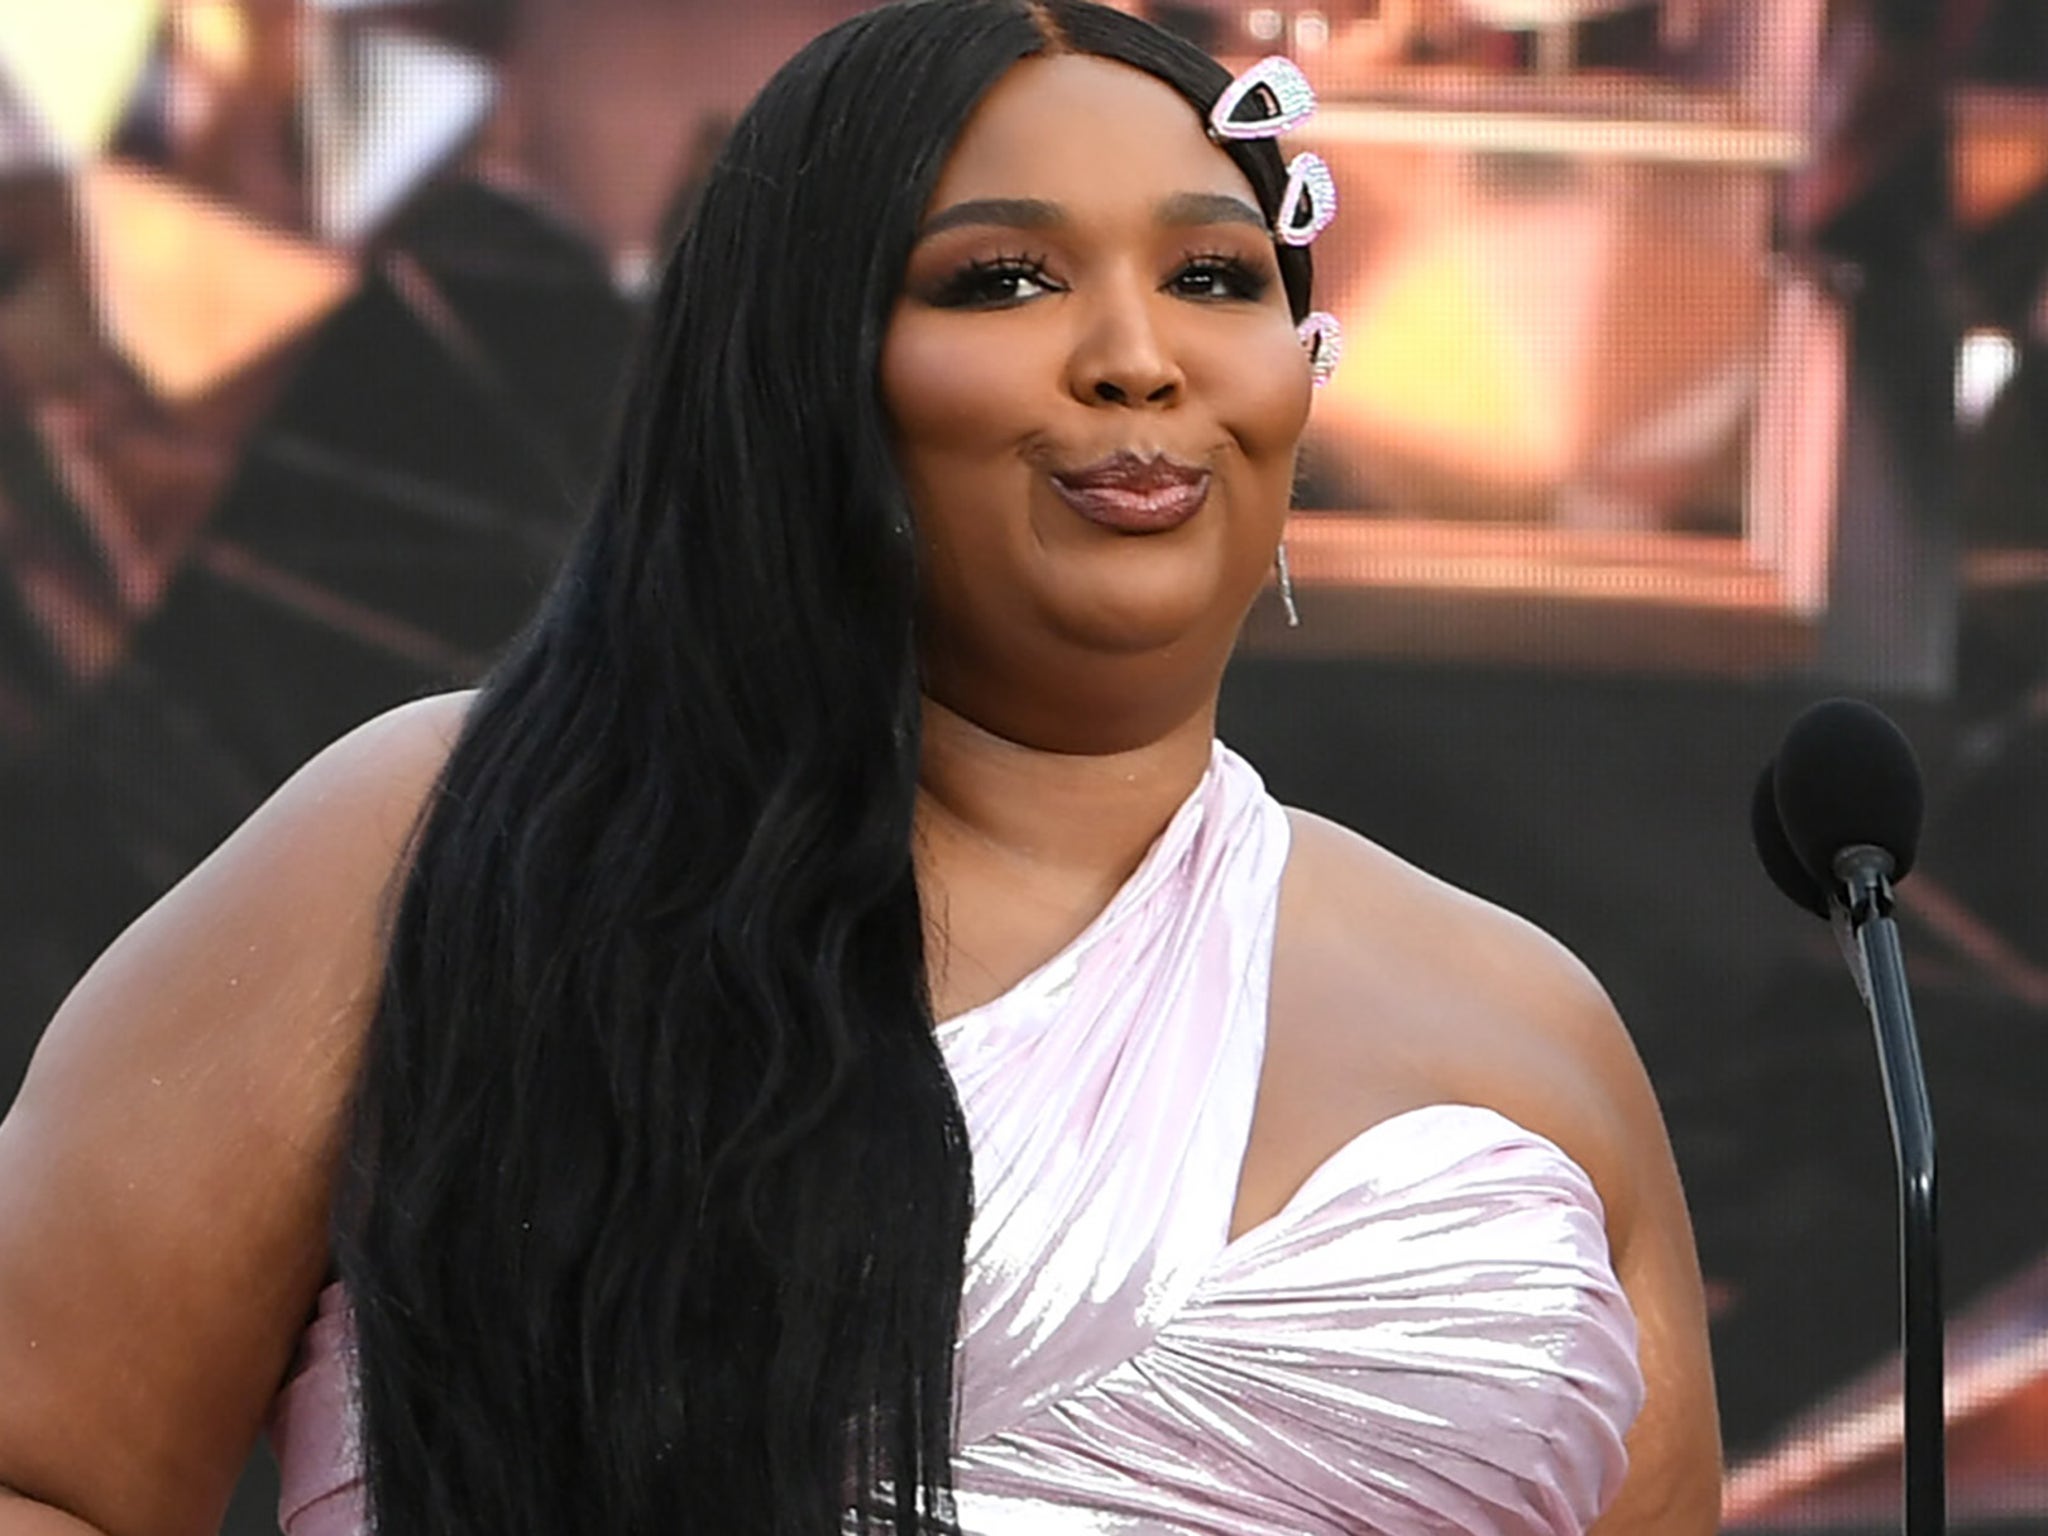 Lizzo Gifts Her Mom a Whole New Wardrobe for Her Birthday in Sweet,  Emotional Video